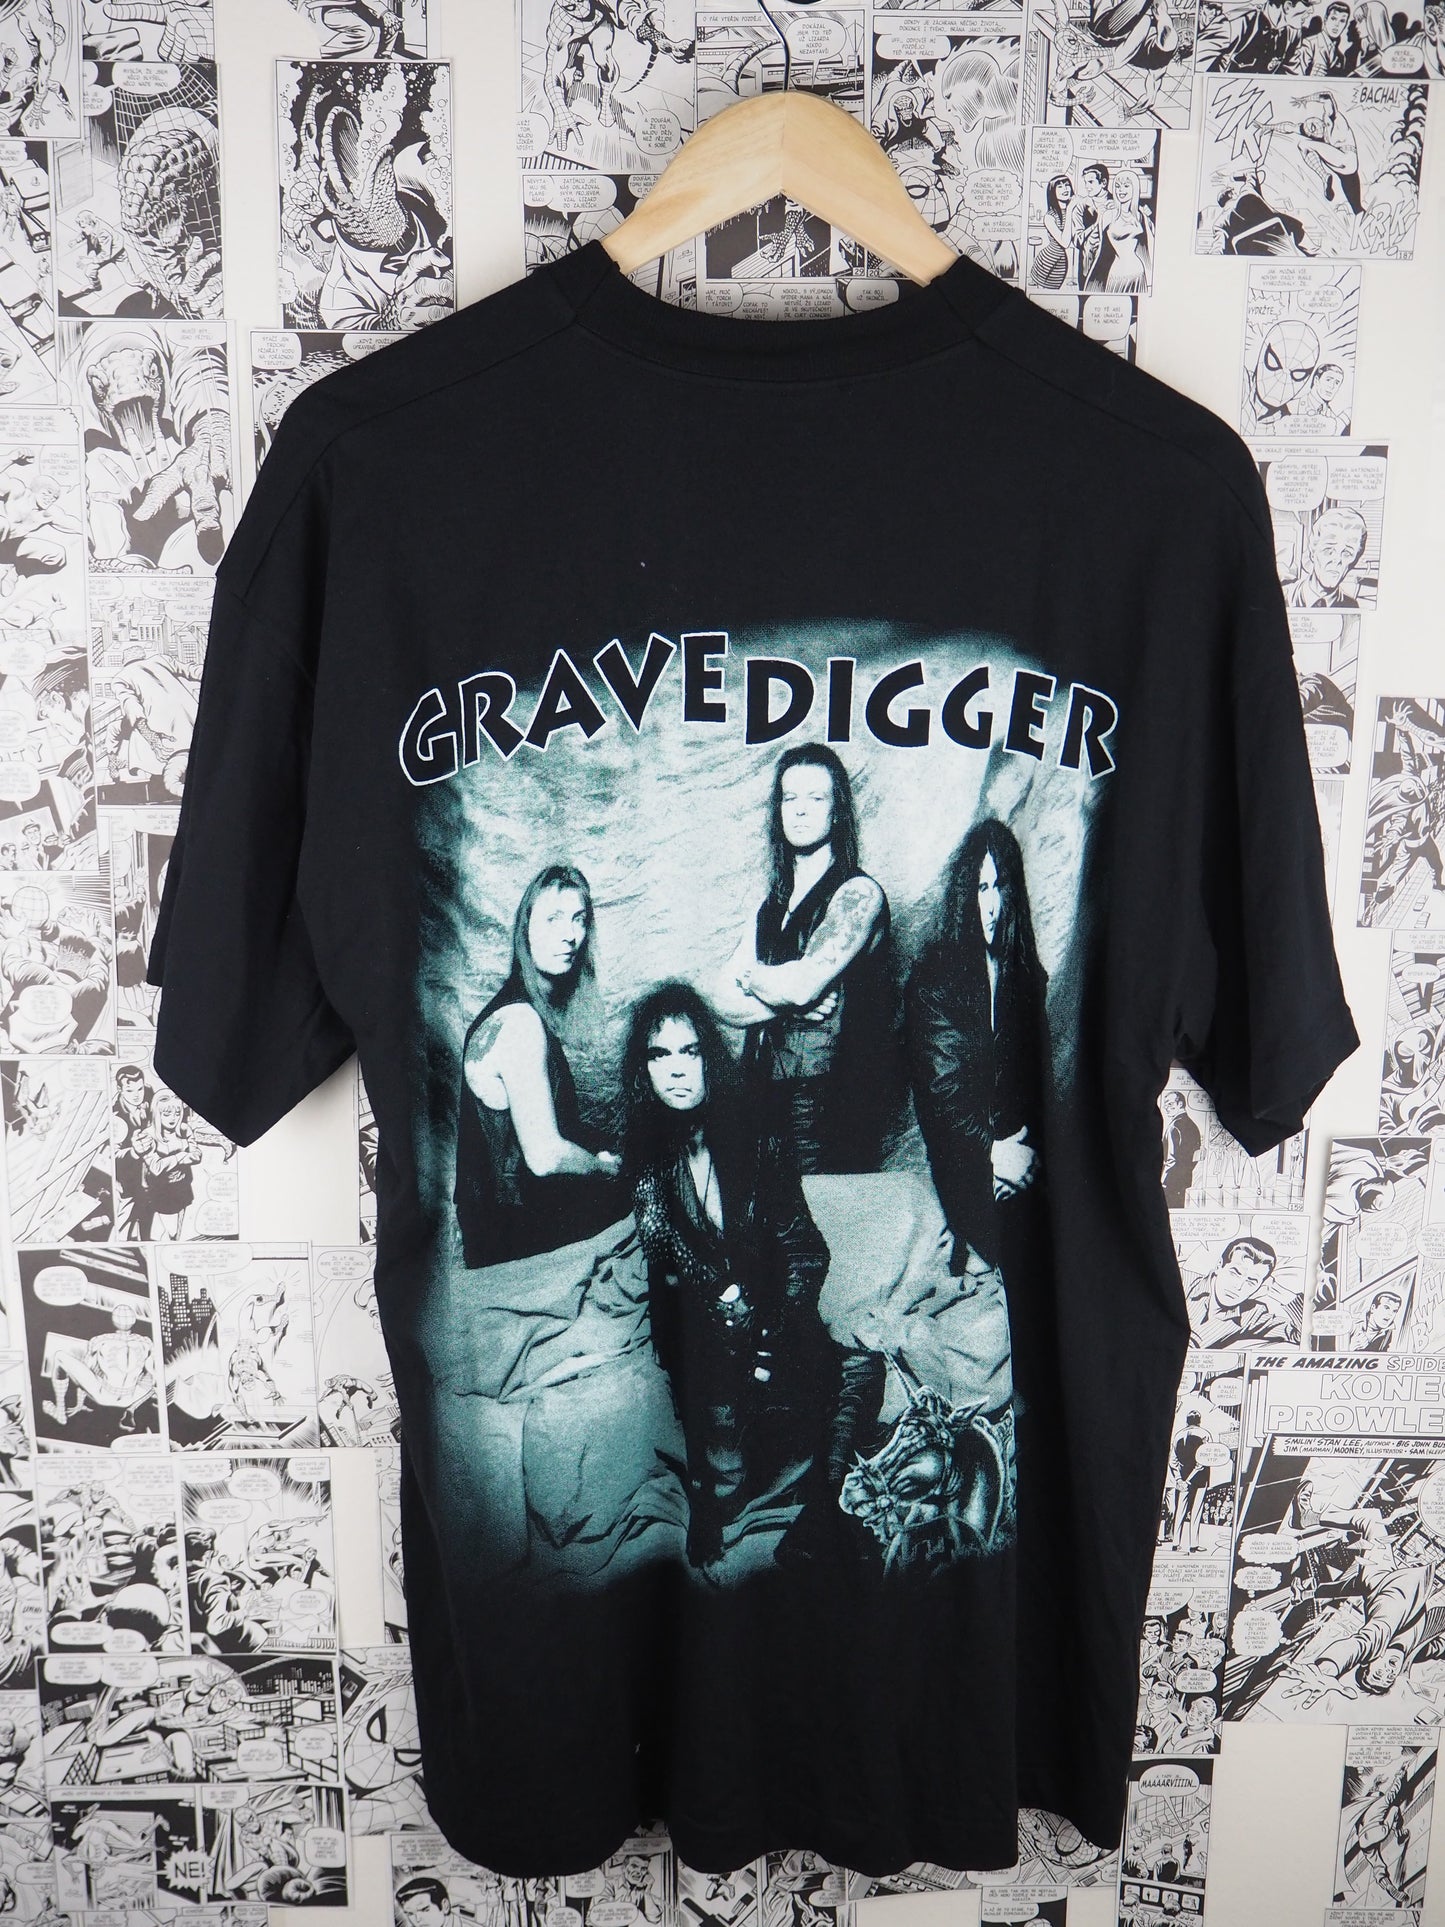 Vintage Grave Digger "Knights of the Cross" 1998 t-shirt - size XL